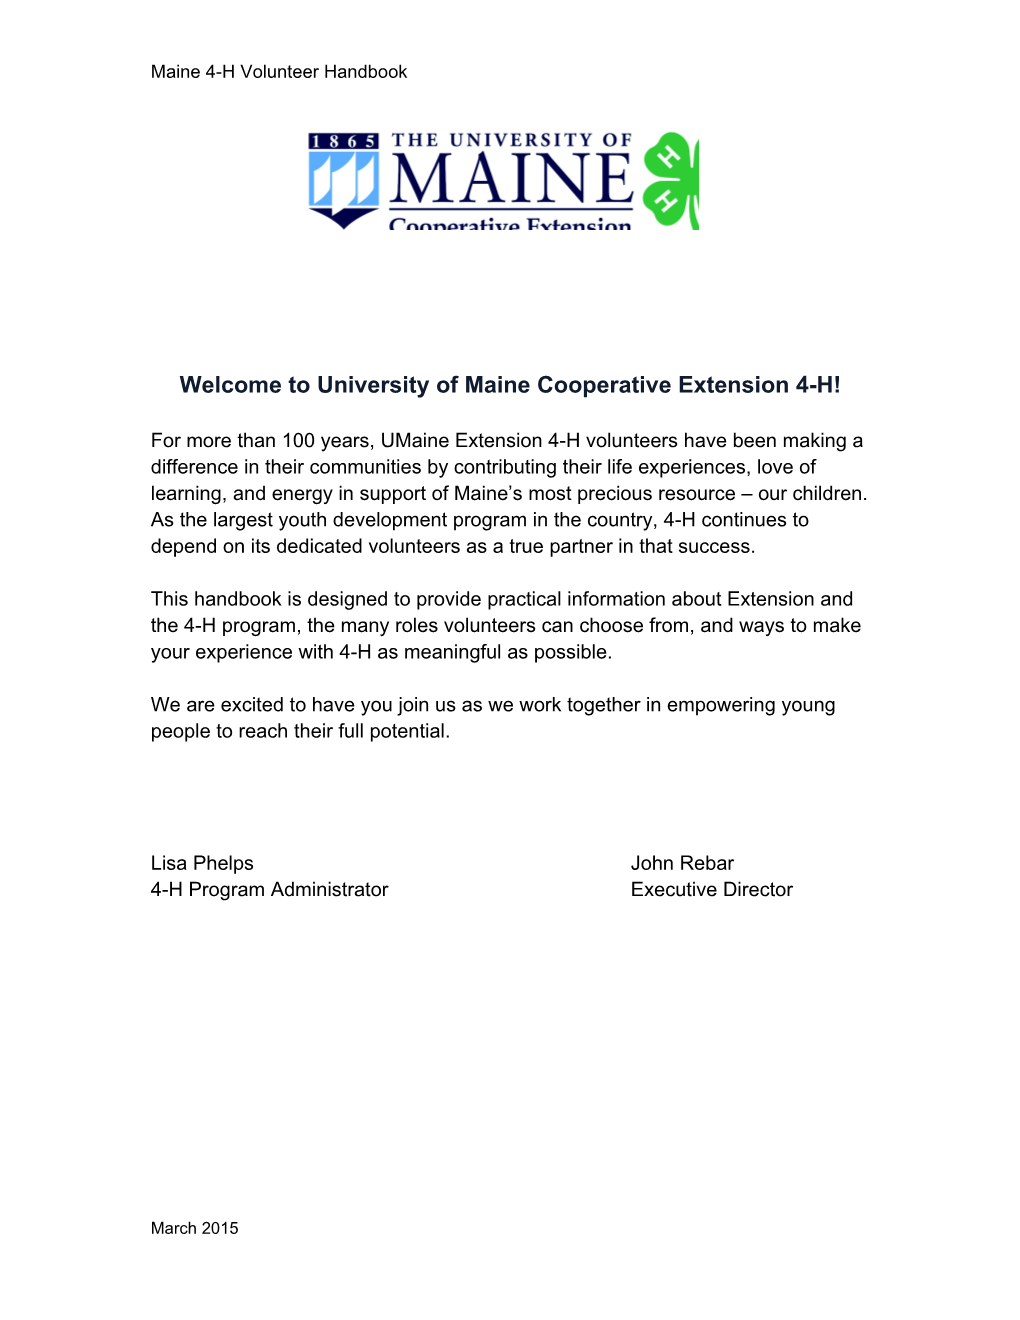 Welcome to University of Maine Cooperative Extension 4-H!